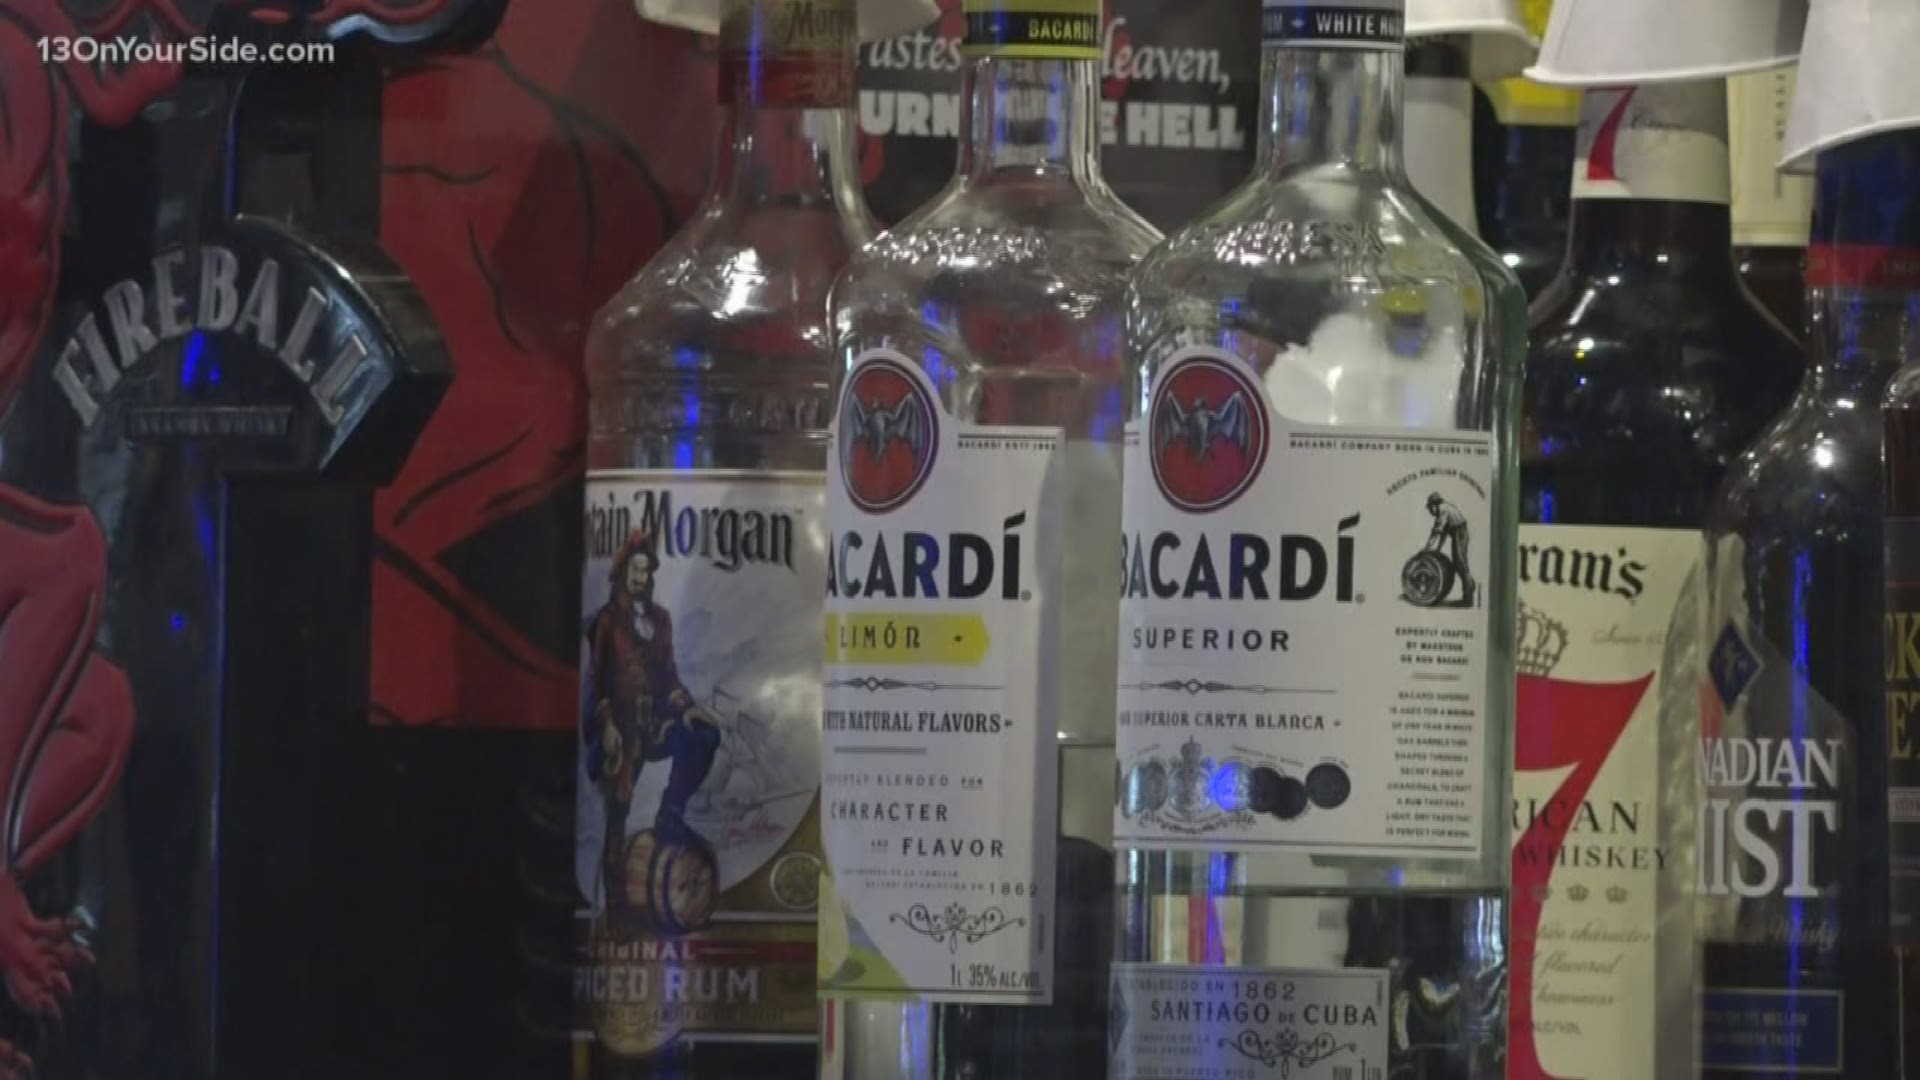 A software issue at a prominent distributing company is creating a liquor shortage.